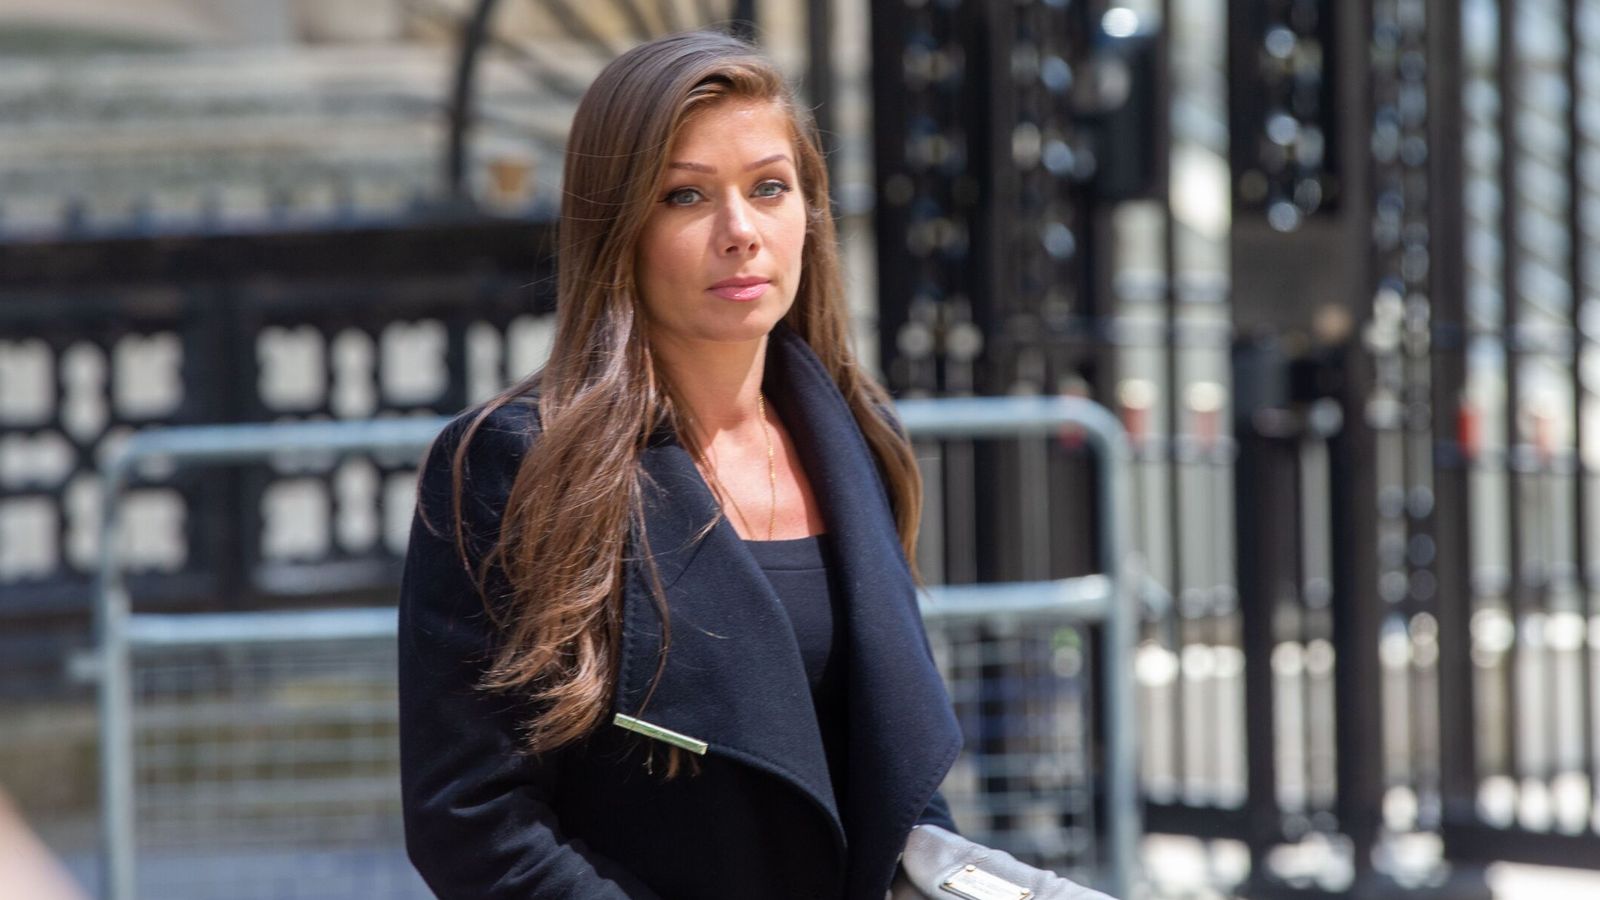 Nikki Sanderson, the well-known actress from Hollyoaks and former Coronation Street star, has given testimony at the High Court, joining Prince Harry as one of the four representative claimants in a lawsuit against Mirror Group Newspapers (MGN) over allegations of unlawful information gathering.